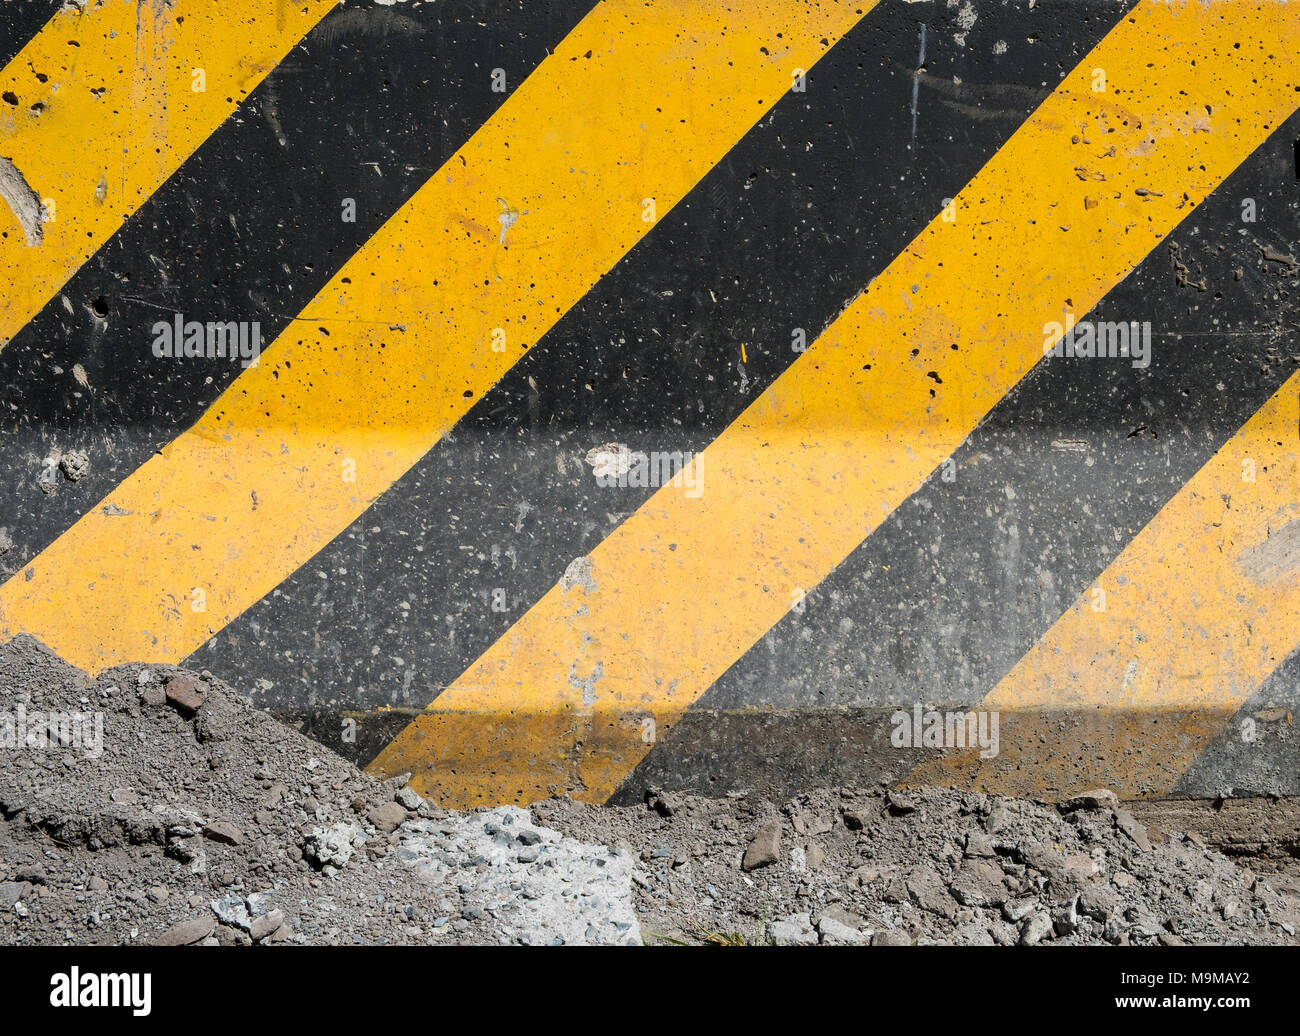 black and yellow stripes on concrete surface, construction site background Stock Photo